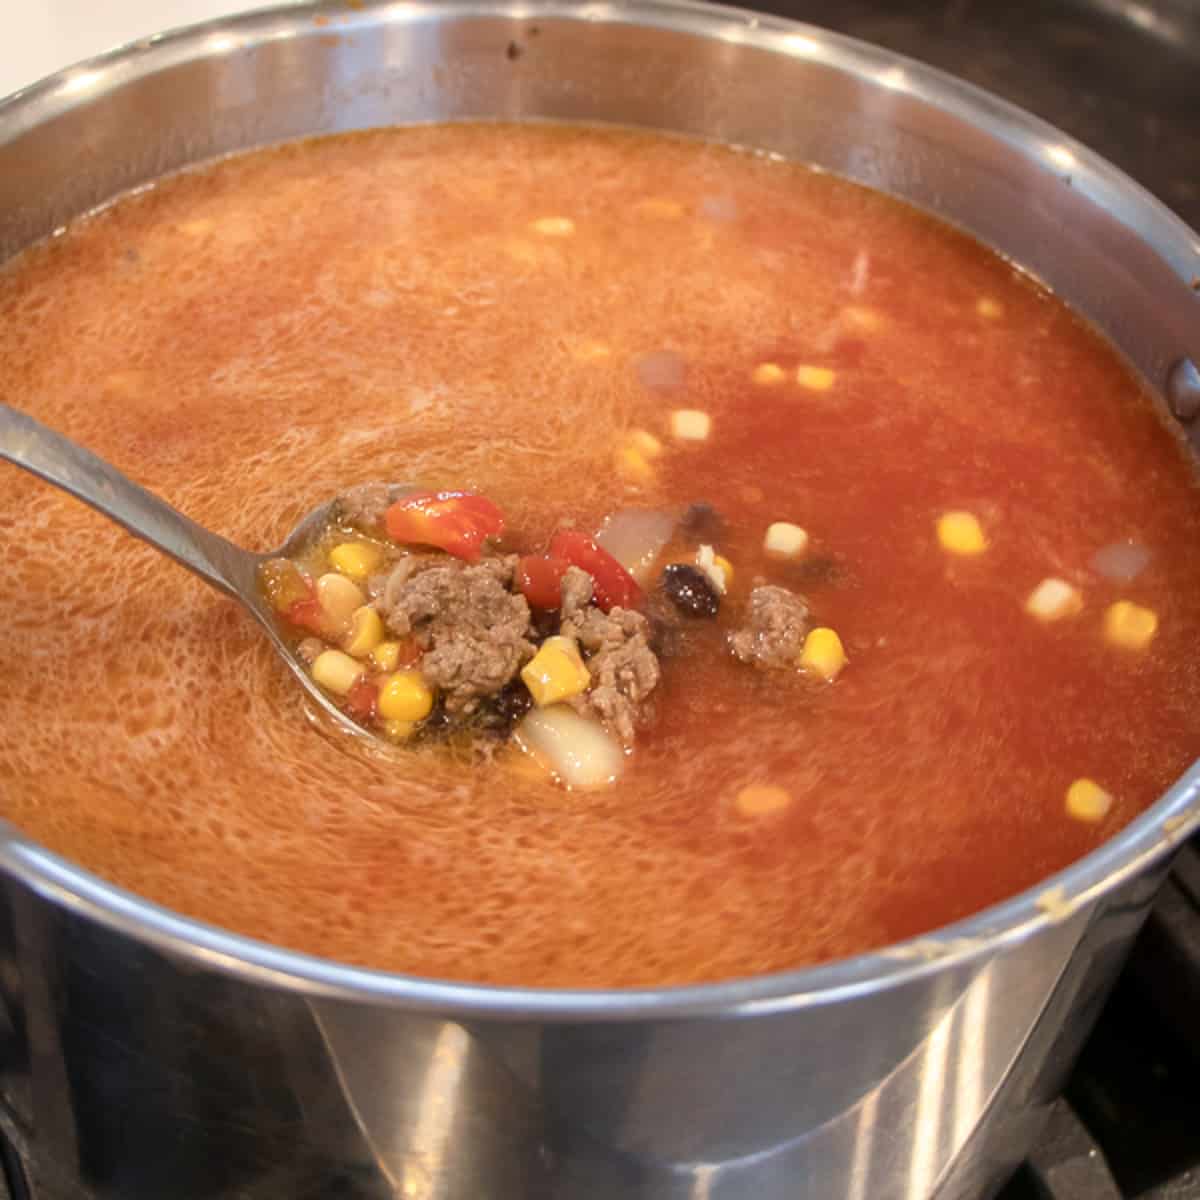 A ladle scooping soup out of a pot.